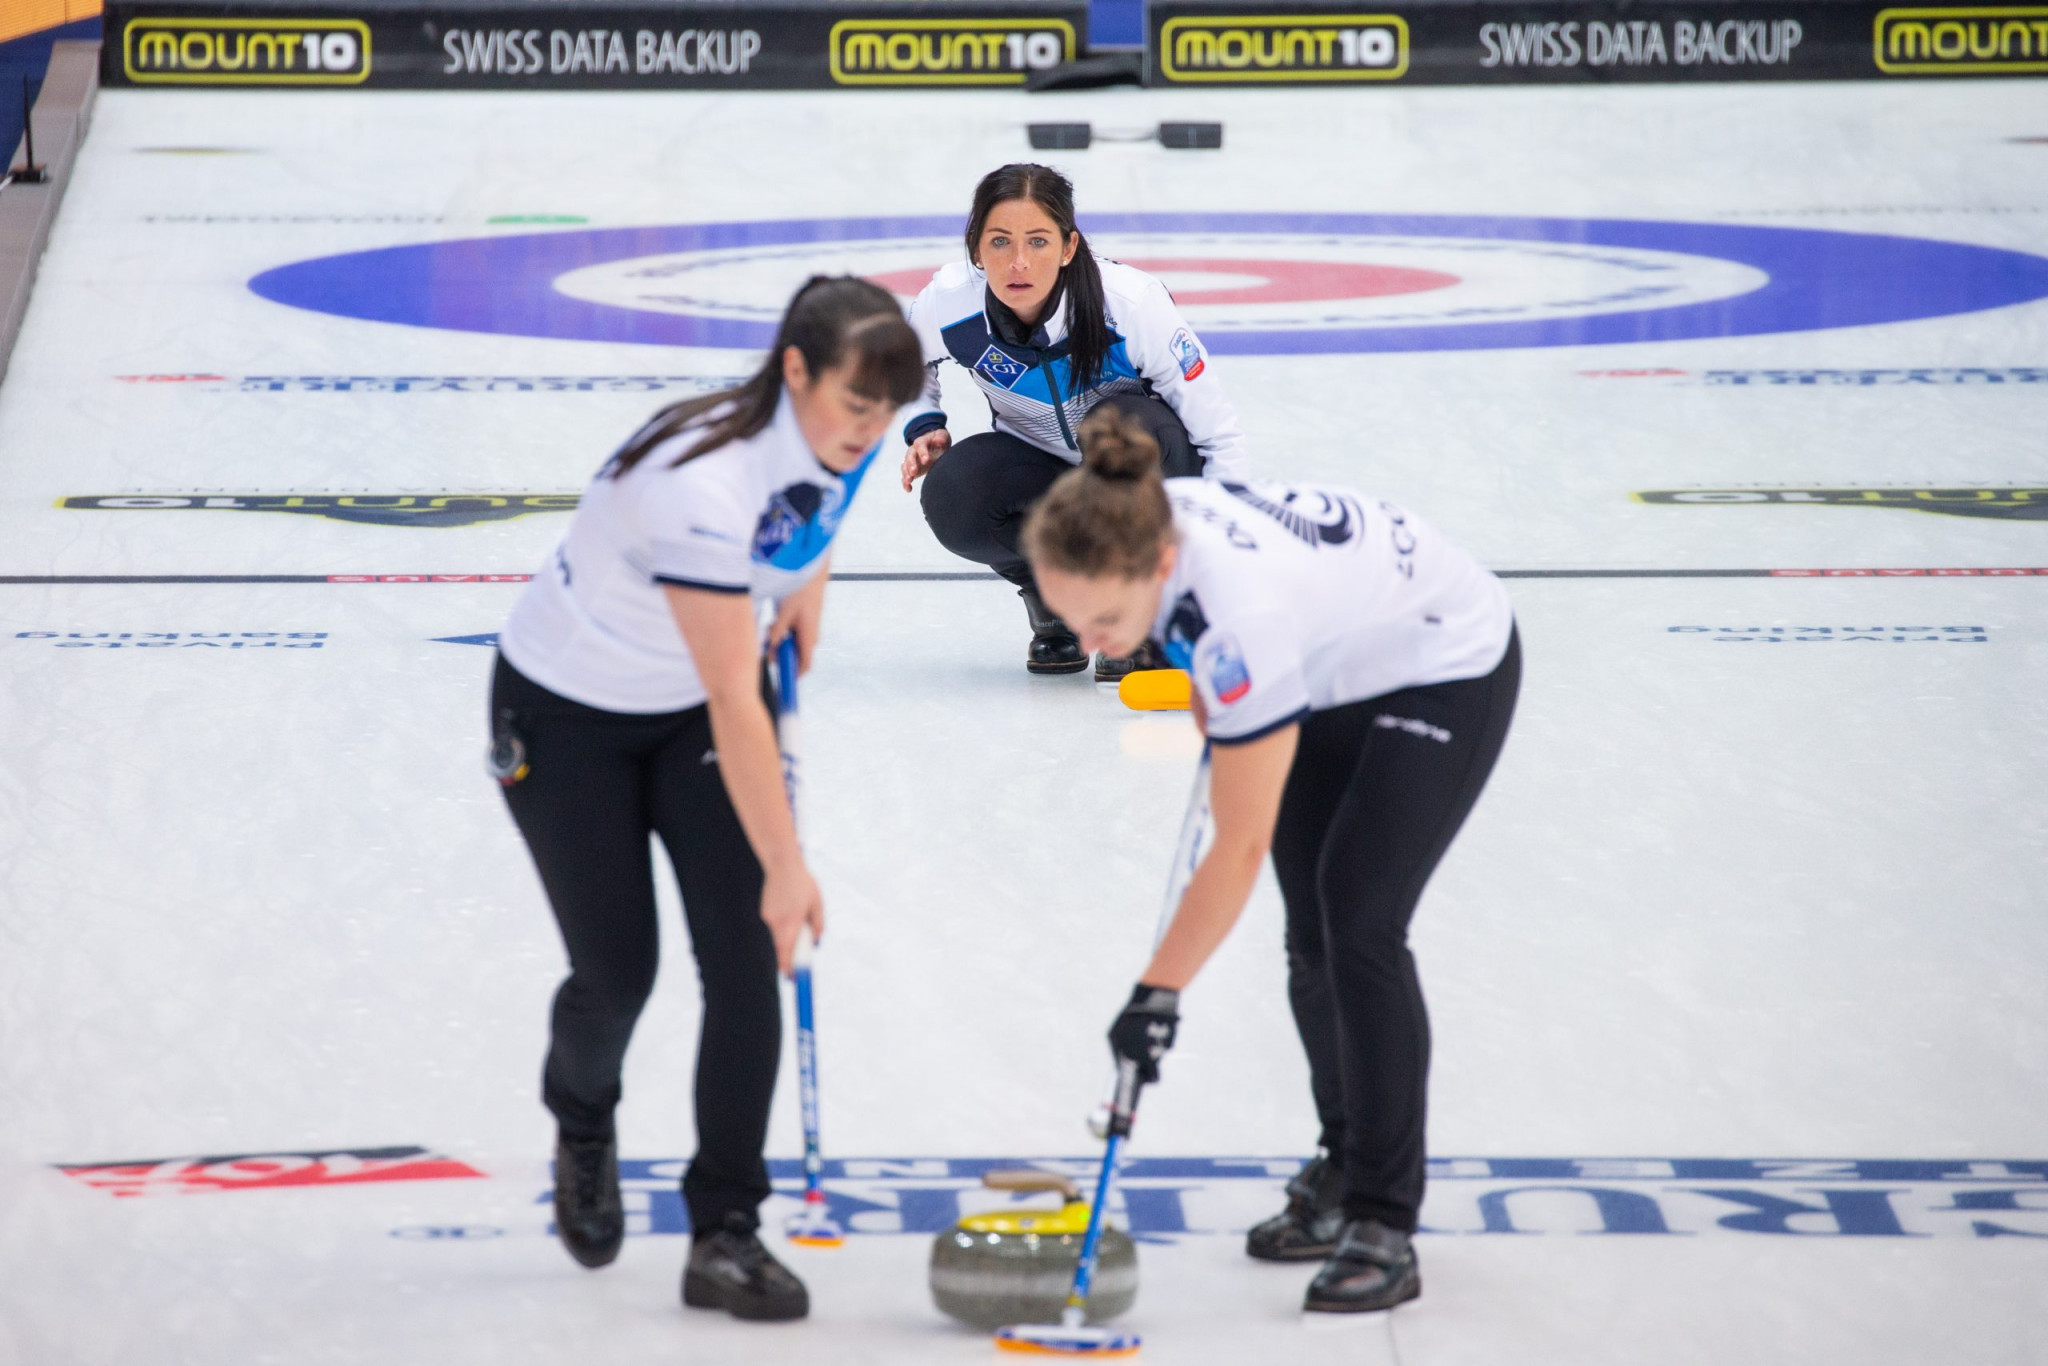 Eve Muirhead's team claimed the gold medal in the women's competition at the European Curling Championships ©Getty Images